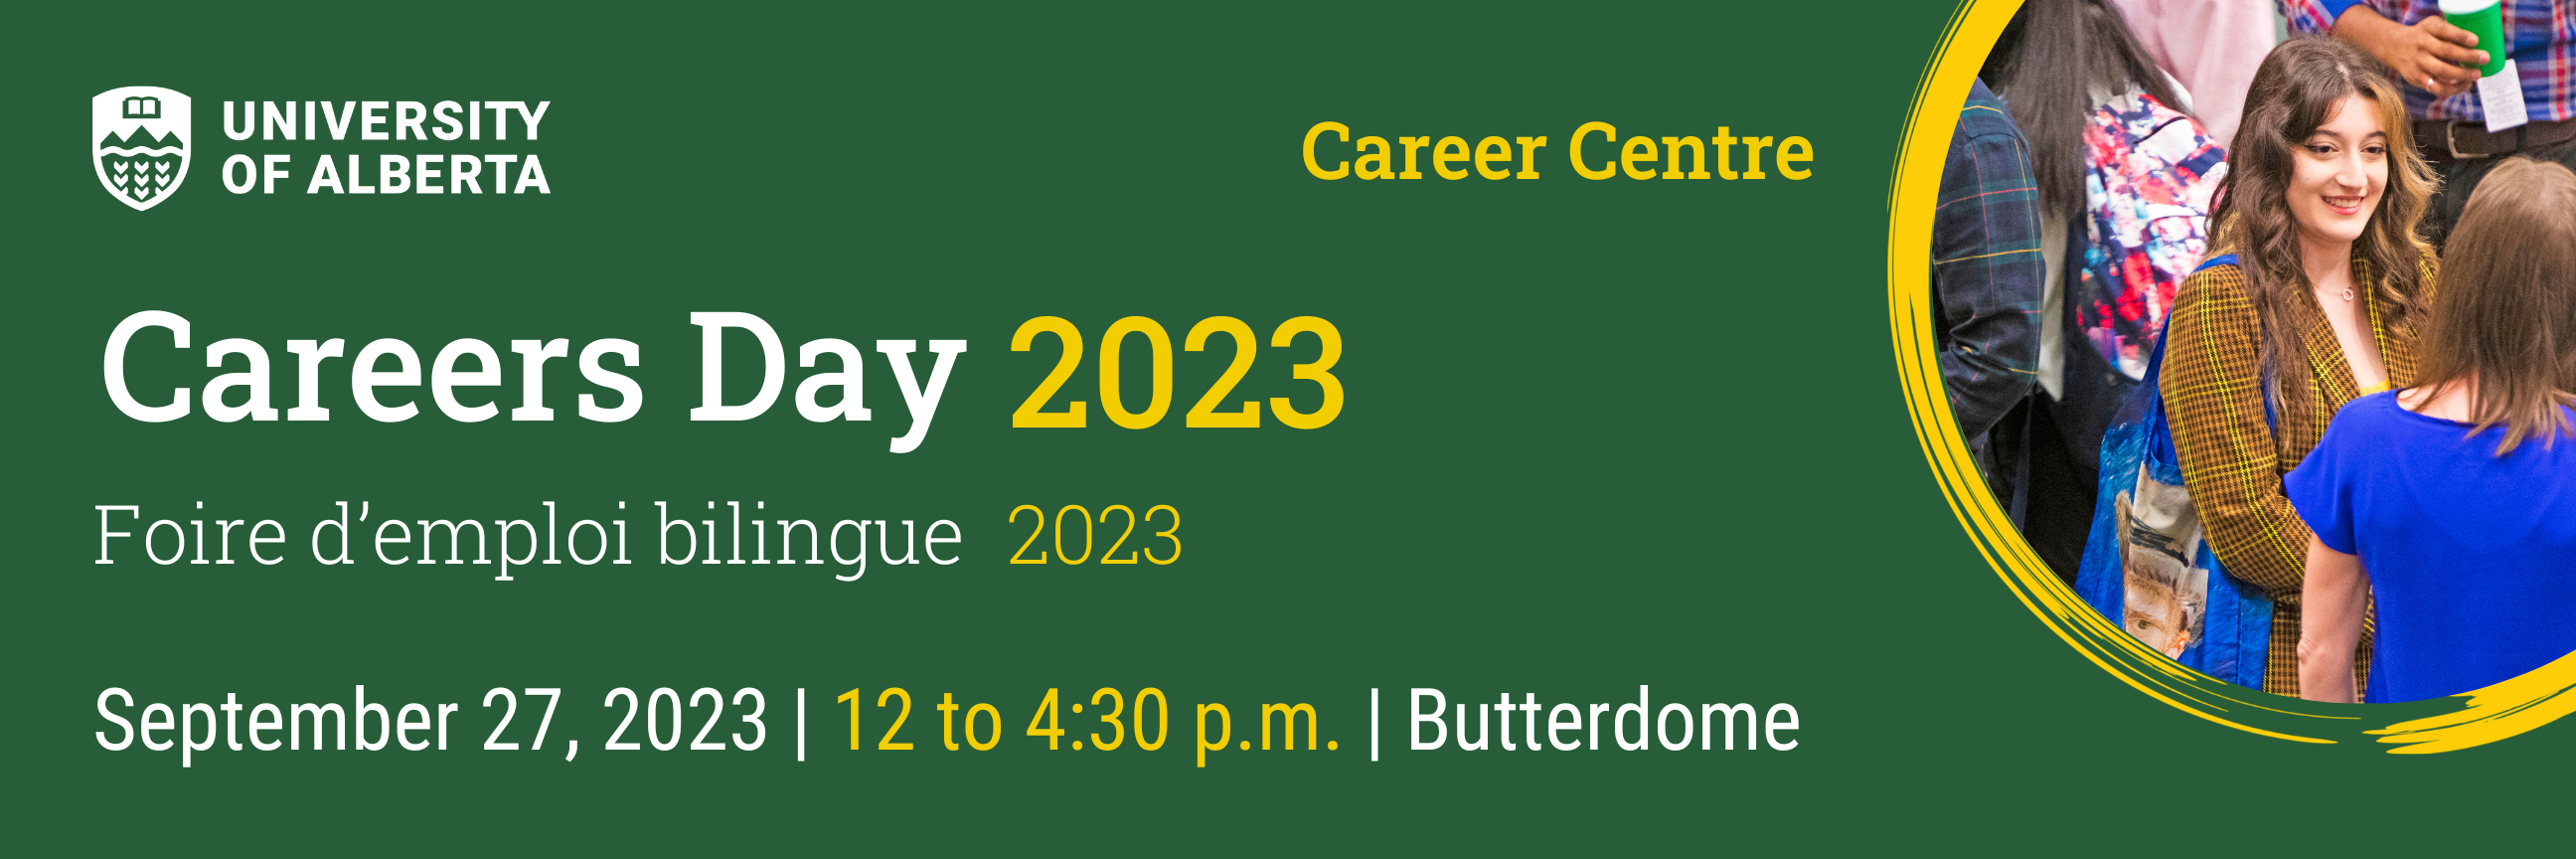 Career Day 2023 / FOIRE D’EMPLOI BILINGUE 2023 - September 27, 2023, 12 to 4:30 p.m., Butterdome